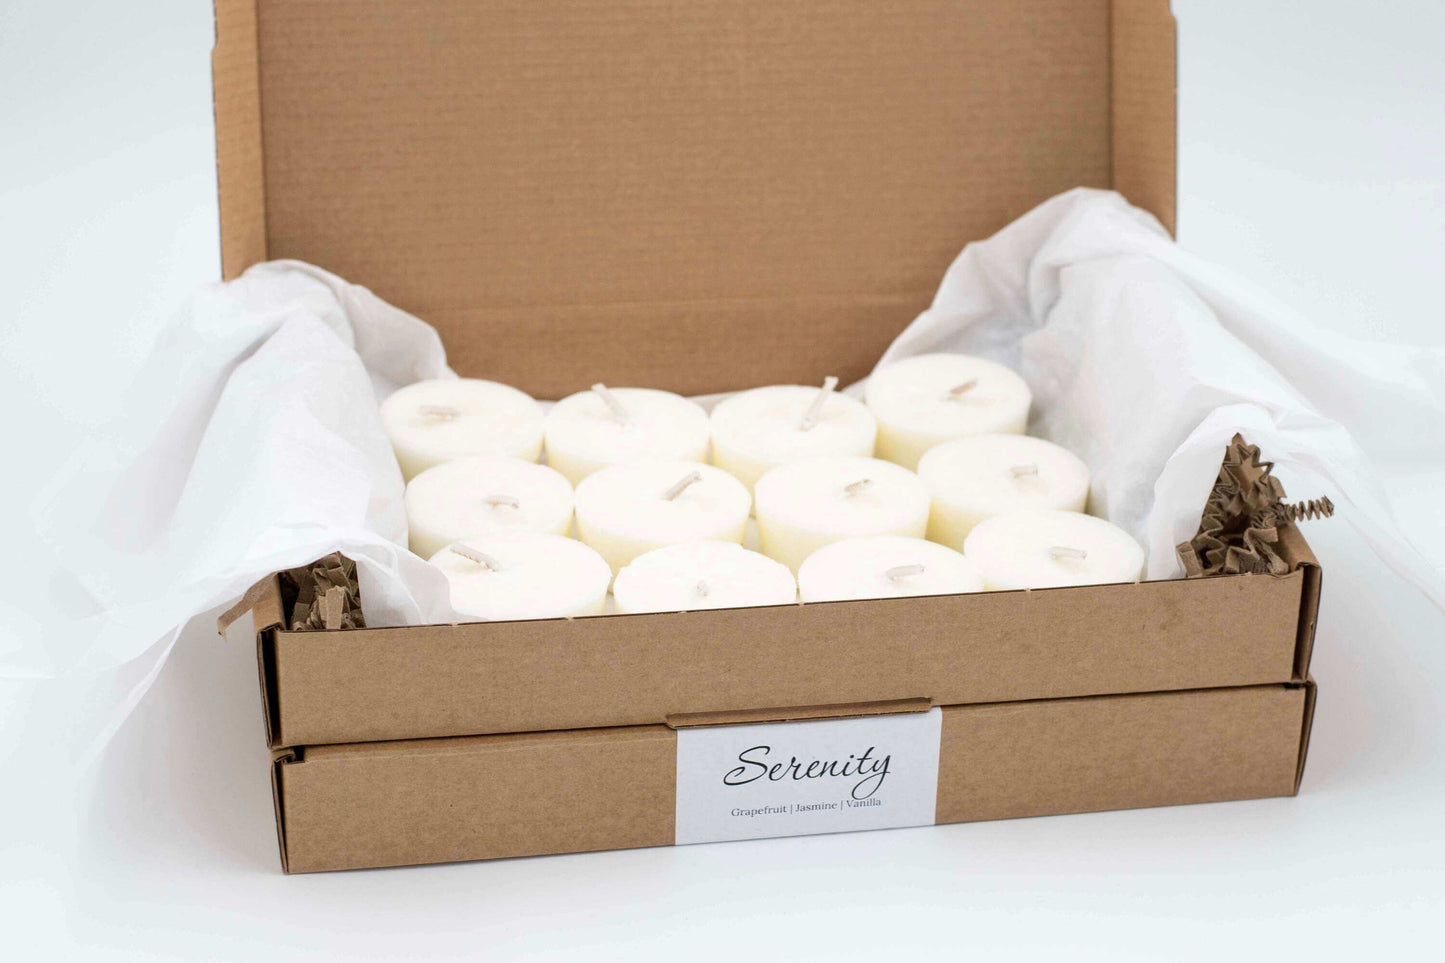 12-pack of Serenity scented tea light candles featuring grapefruit, vanilla, and jasmine, eco-friendly, vegan, and refillable, in a cardboard box